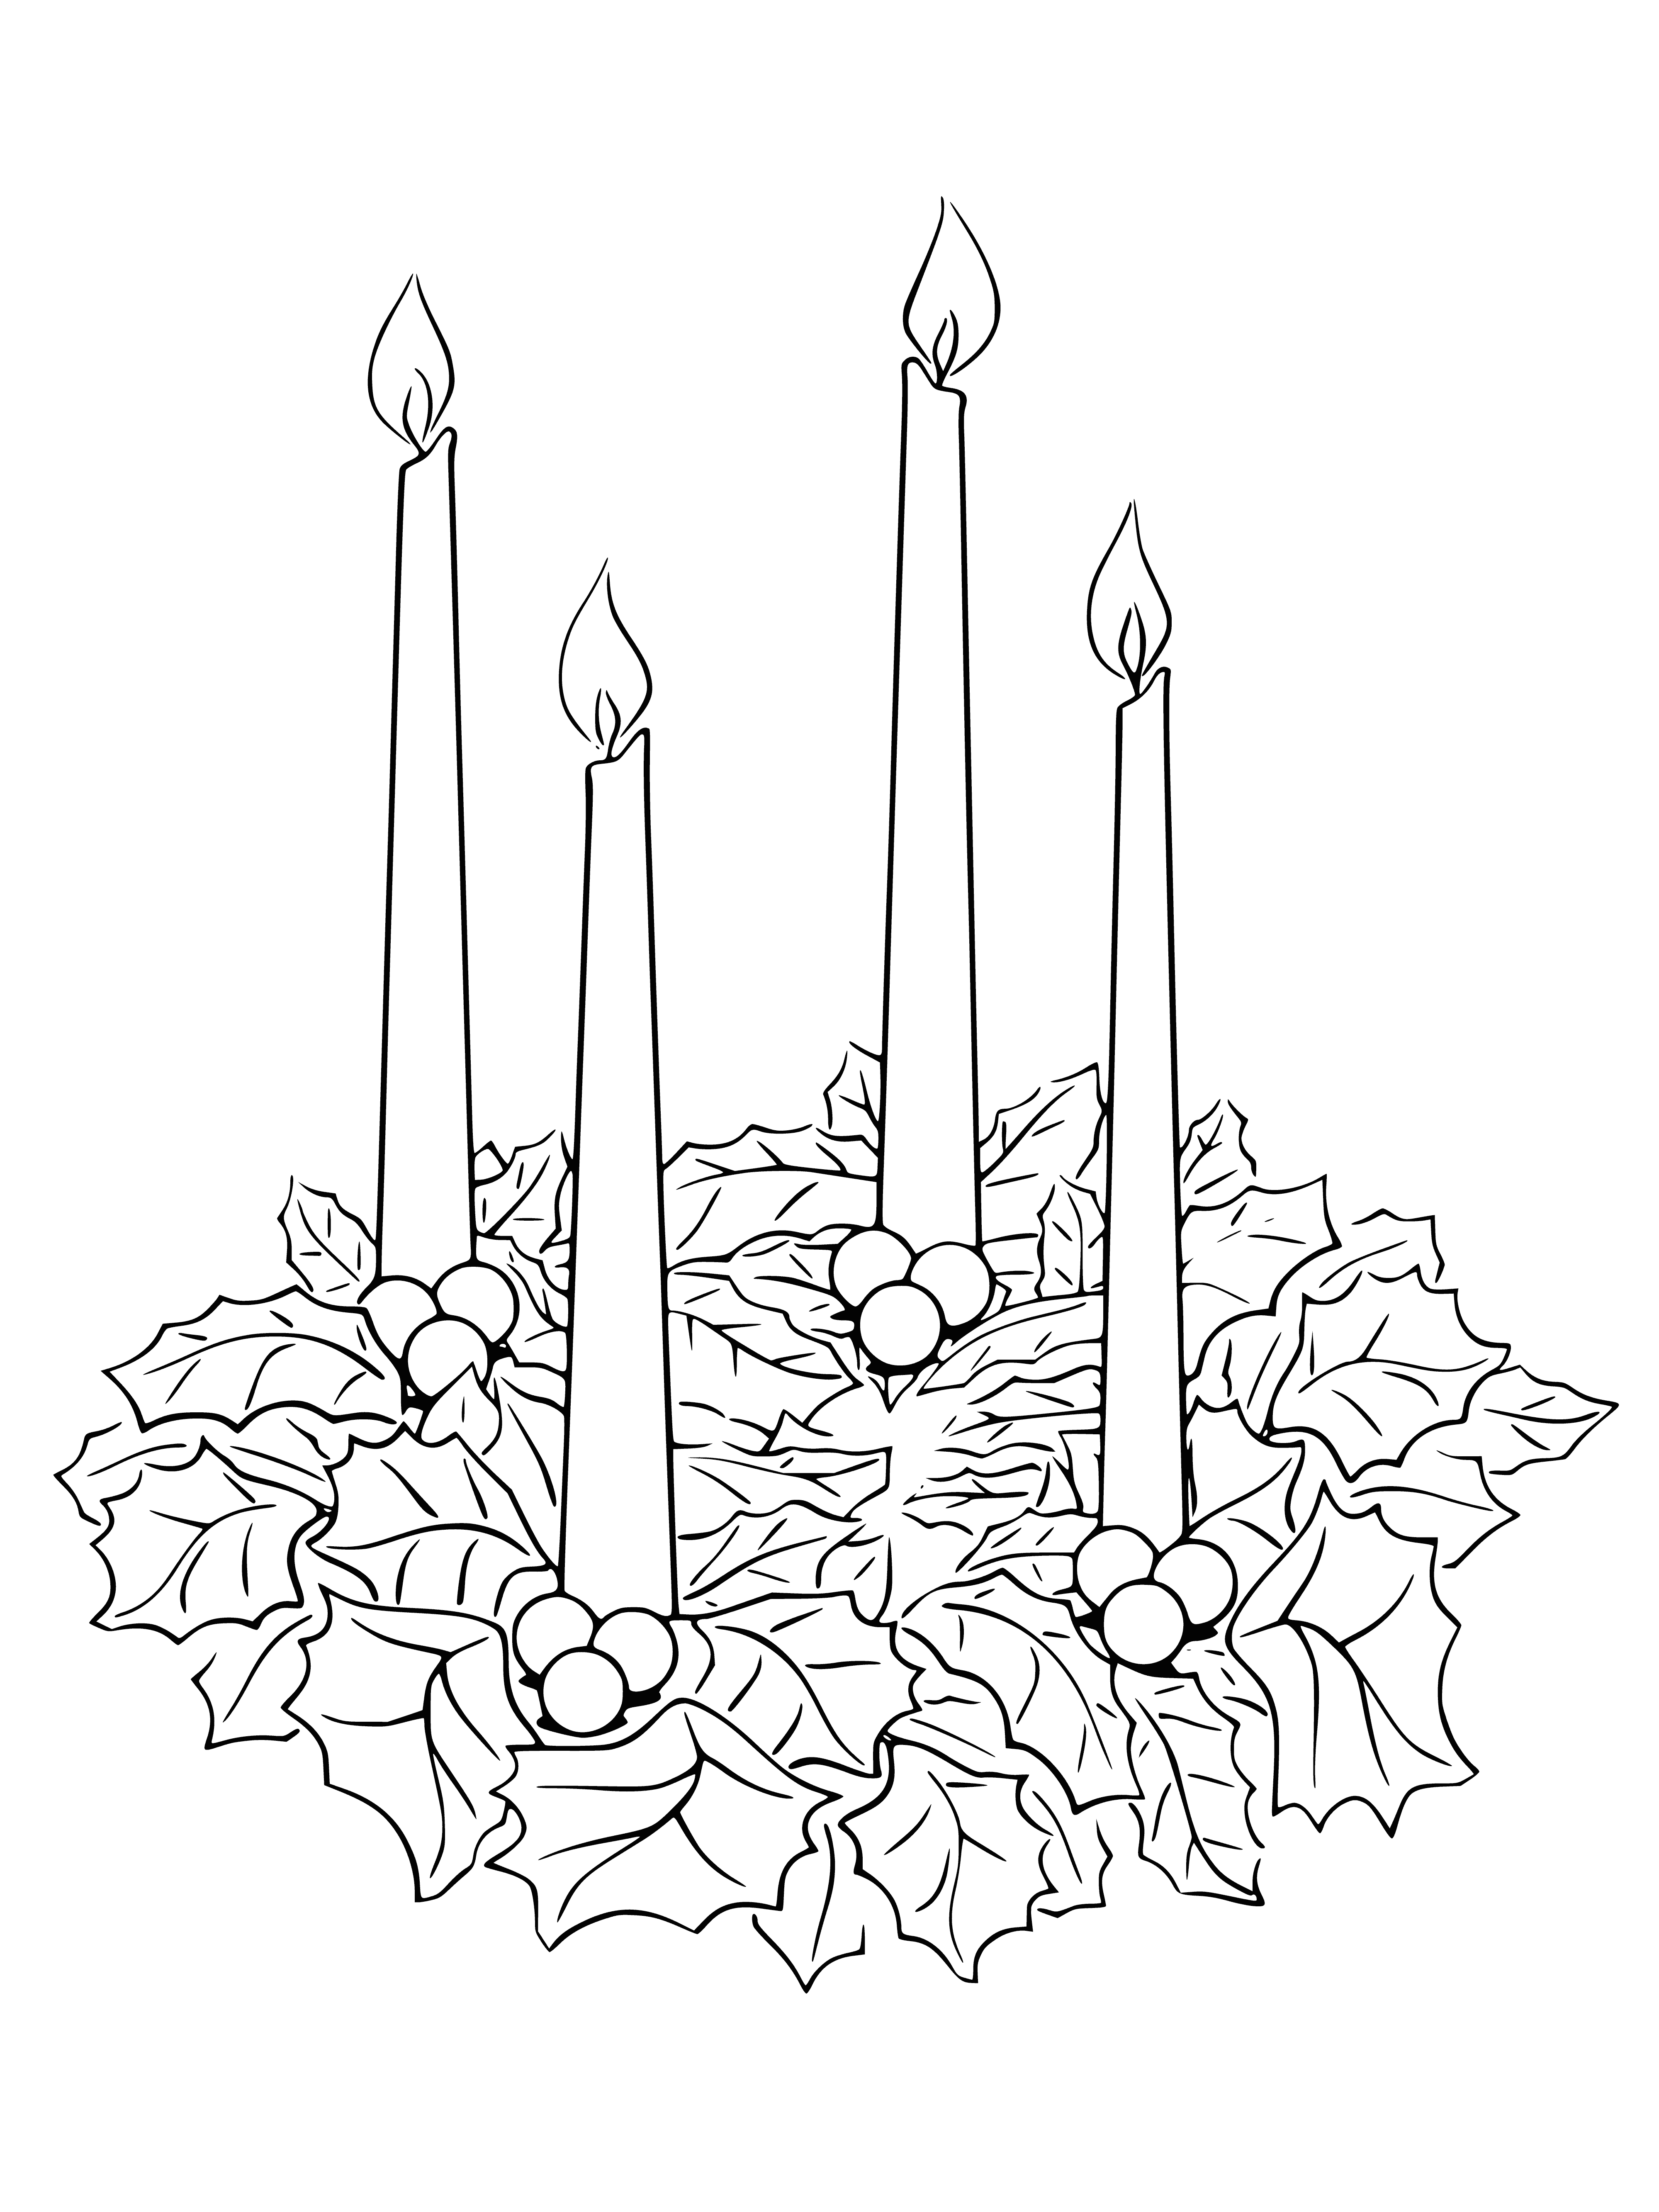 2 wreaths with 5 candles in different colors, decorated with holly & berries - perfect for holiday coloring! #coloringpages